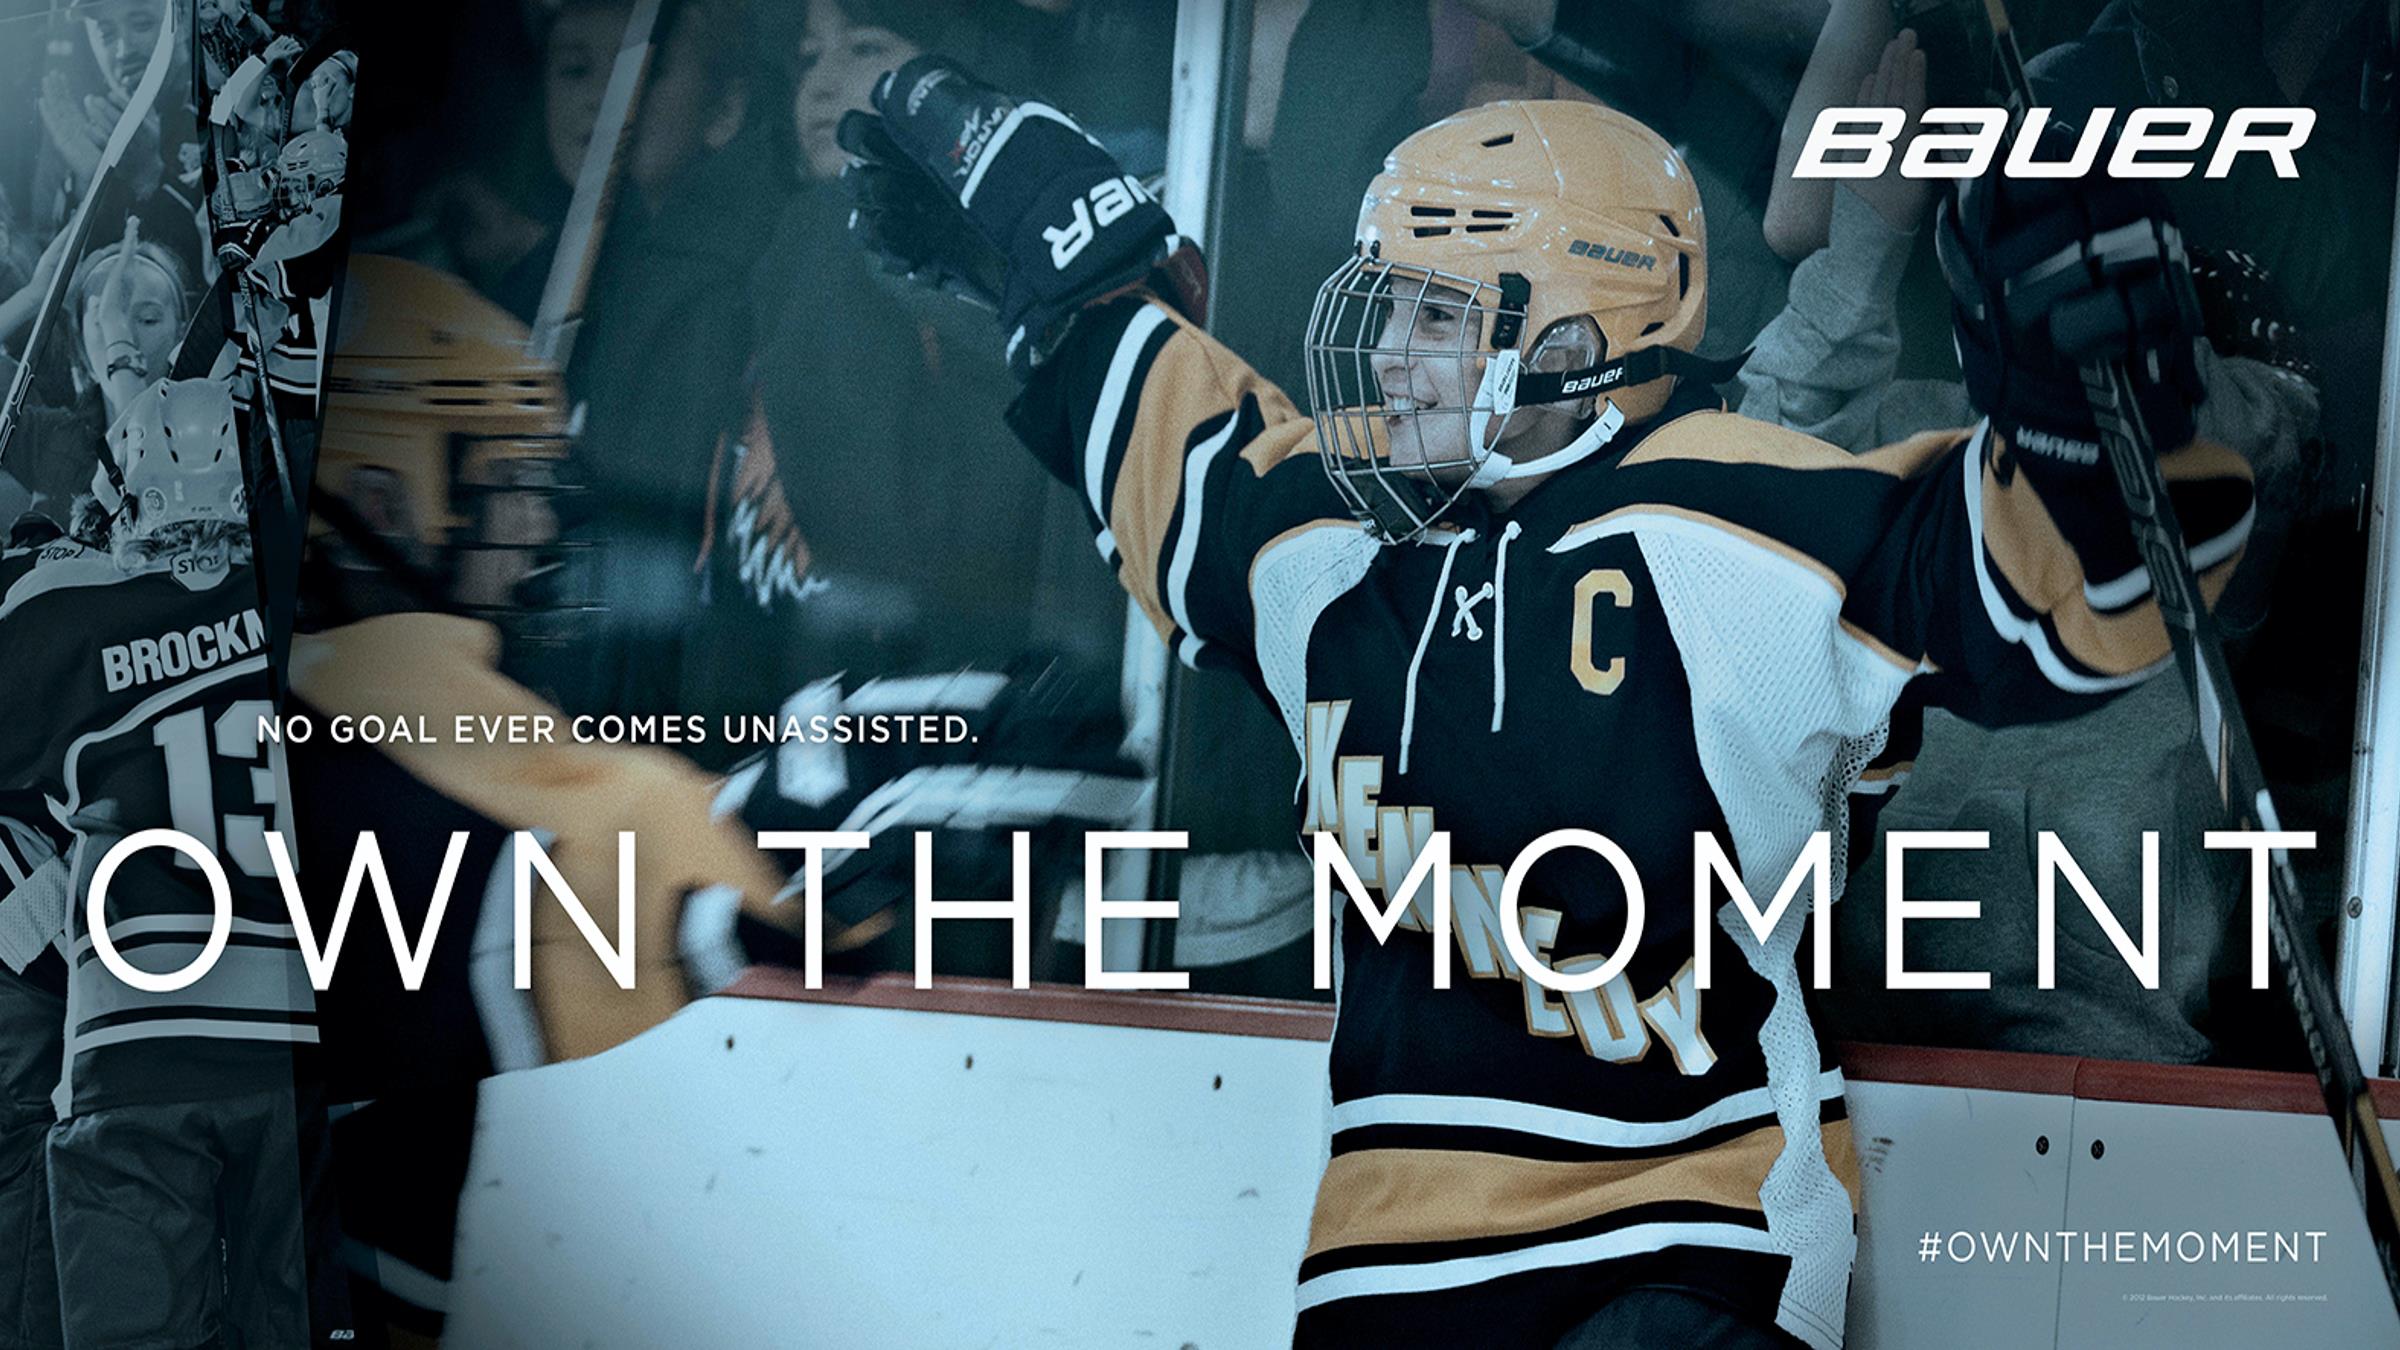 Integrated Campaign: Advertising, Digital Experience, Experiential Activation, Media, Social Media - Bauer Hockey "Own The Moment"